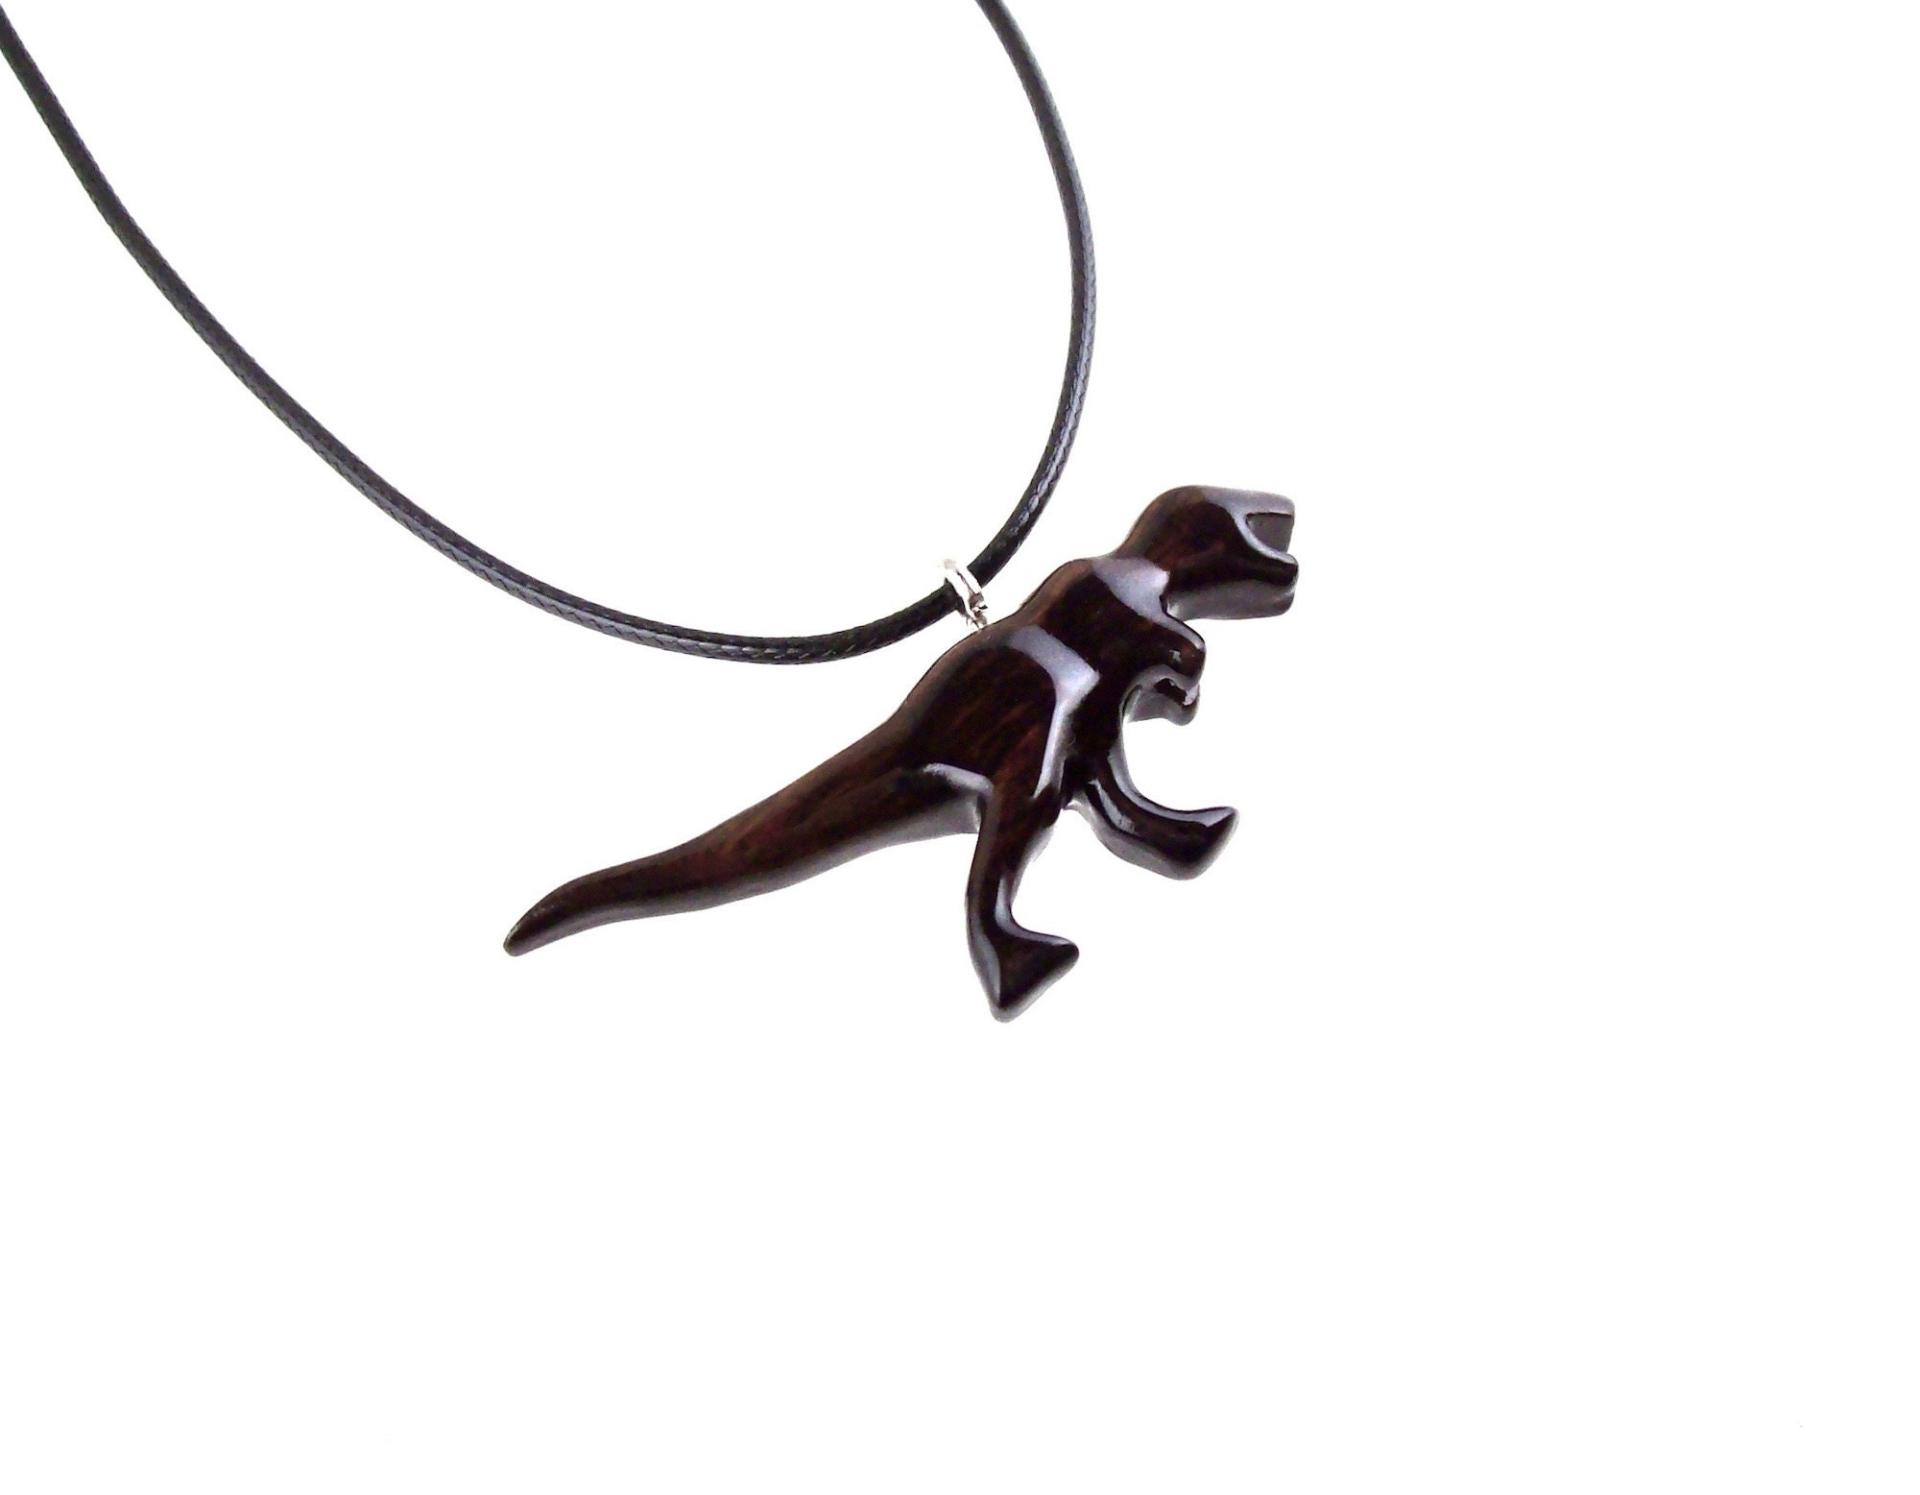 Dinosaur Necklace, Hand Carved Wooden T-Rex Pendant for Men or Women, Tyrannosaurus Necklace, Wood Jurassic Reptile Jewelry